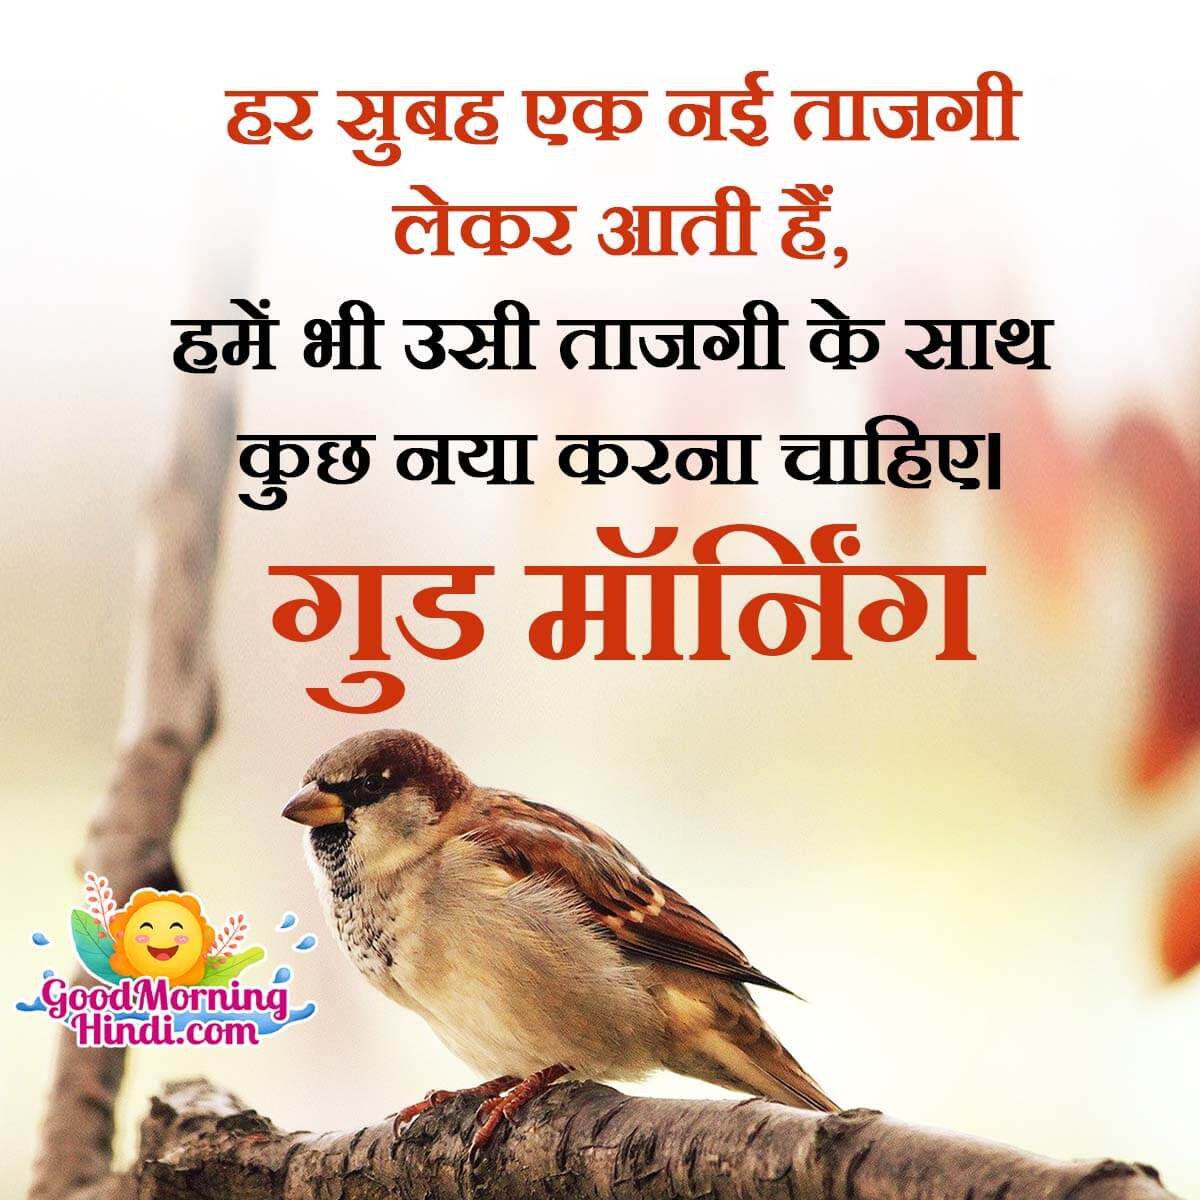 Inspirational  Good Morning Messages In Hindi